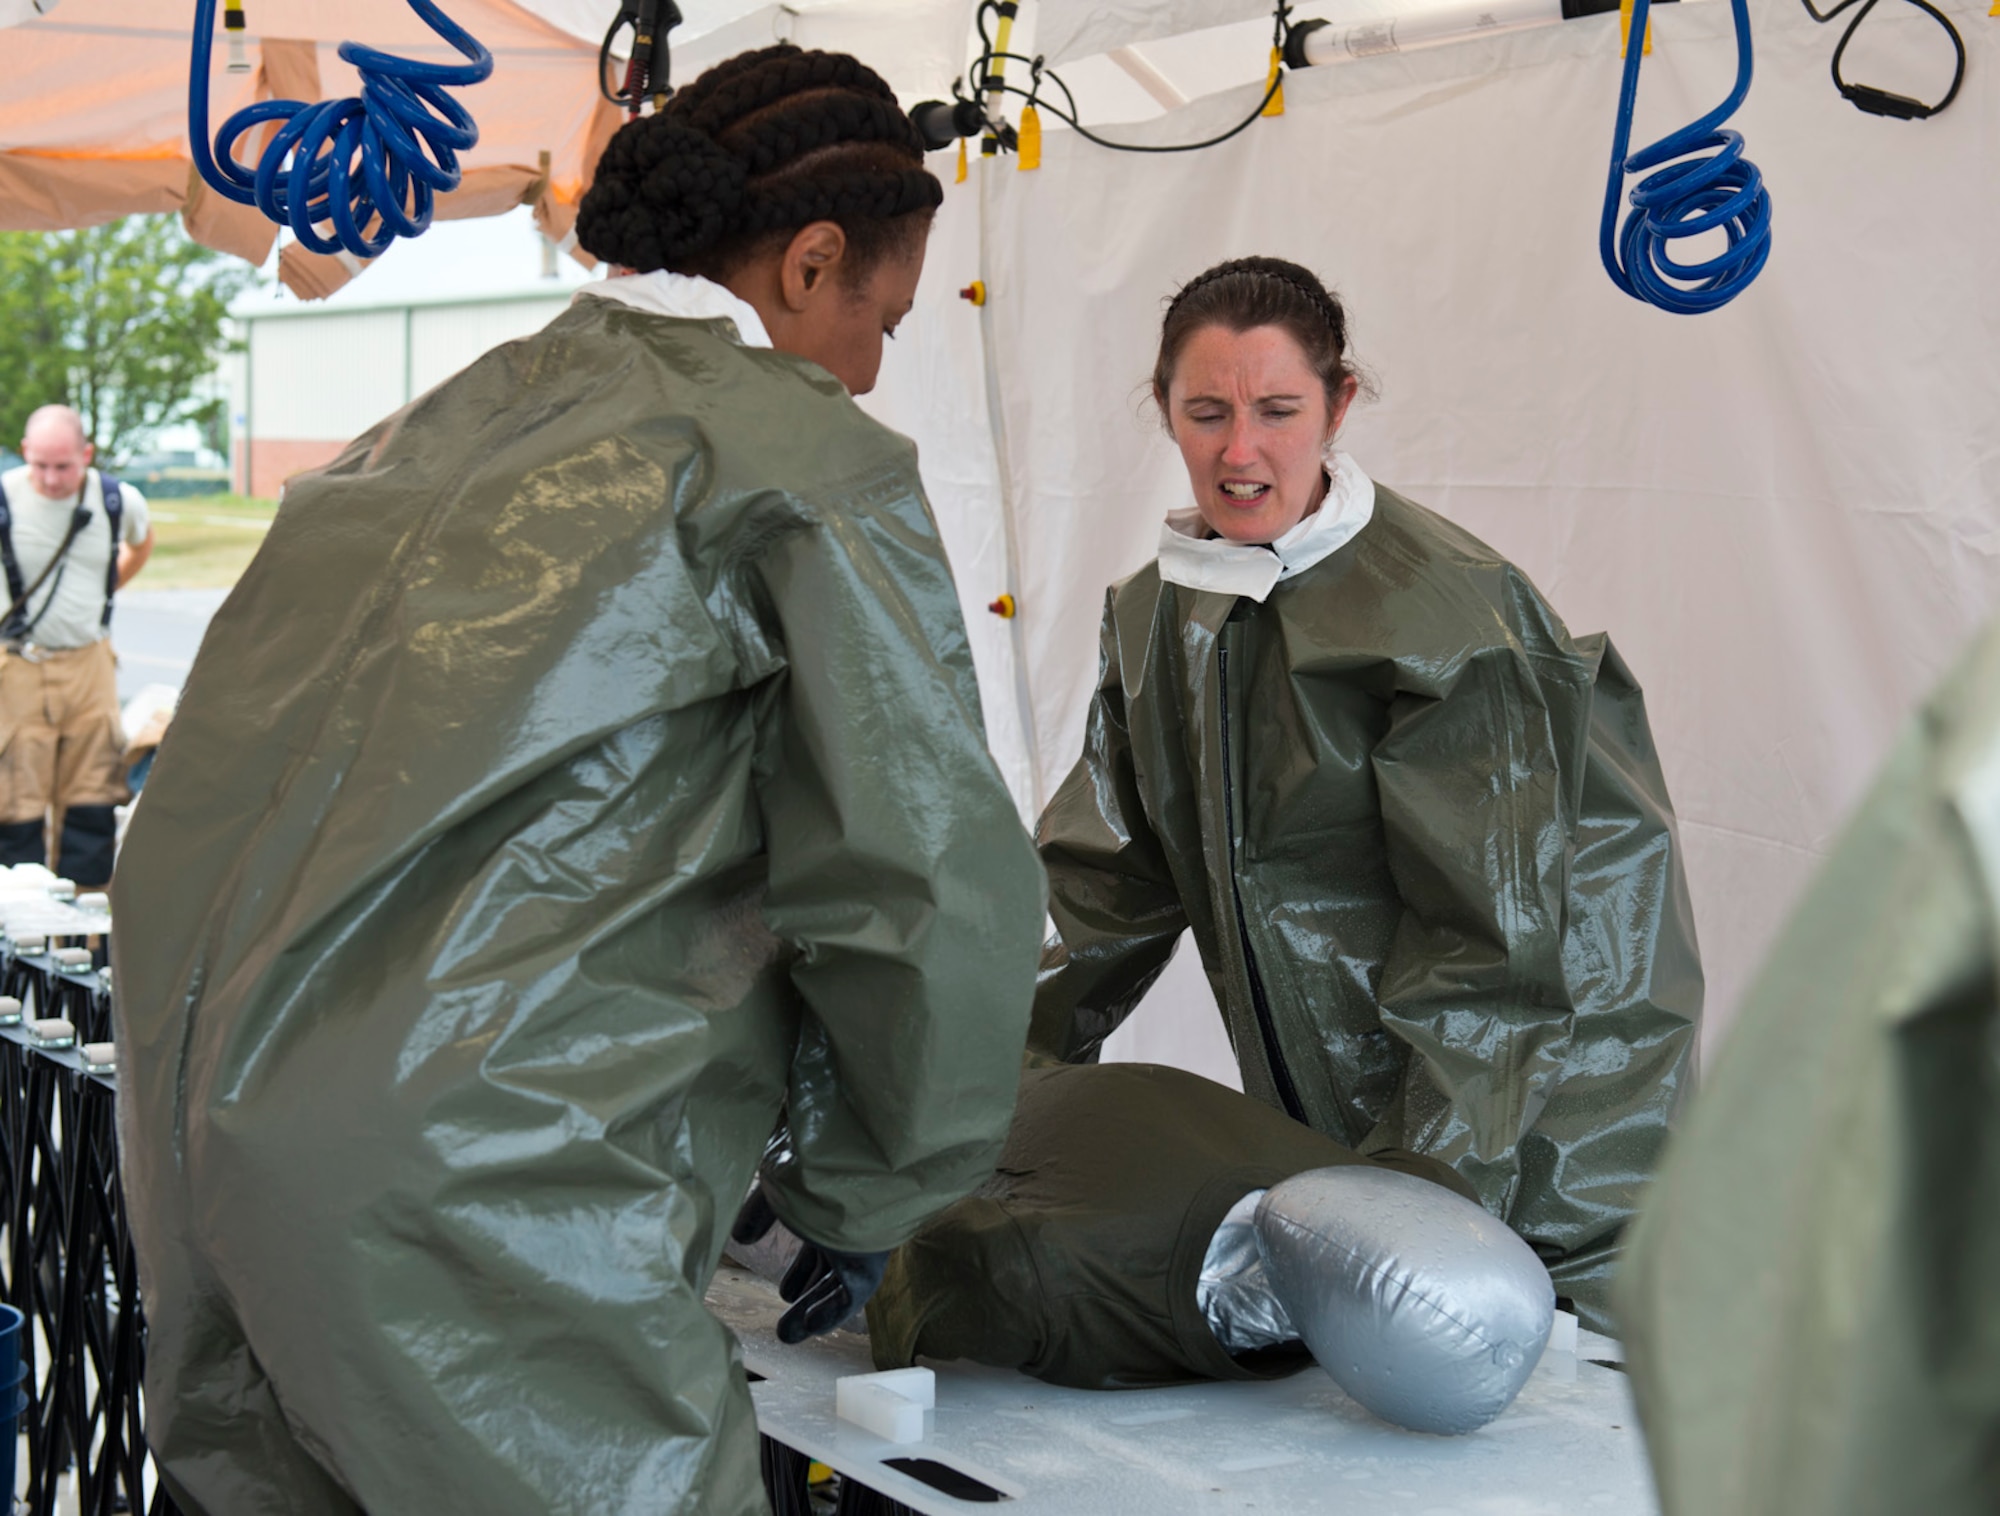 Master Sgt. Nicole Pollard (left) and Tech. Sgt. Helen Wolfley (right), members of the patient decontamination team at the 167th Airlift Wing in Martinsburg, W.Va., conduct decontamination on a litter patient during the Counter-Chemical, Biological, Radiological and Nuclear (CBRN) All-Hazard Management Response (CAMR) Course Table Top Exercise at the wing, August 7, 2015. “The 167th did an amazing job coming together for both the training and all the exercises that took place throughout the week,” said Master Sgt. Gary Fletcher, NCOIC of bioenvironmental engineering at the 167th AW. (Air National Guard photo by Staff Sgt. Jodie Witmer/released)